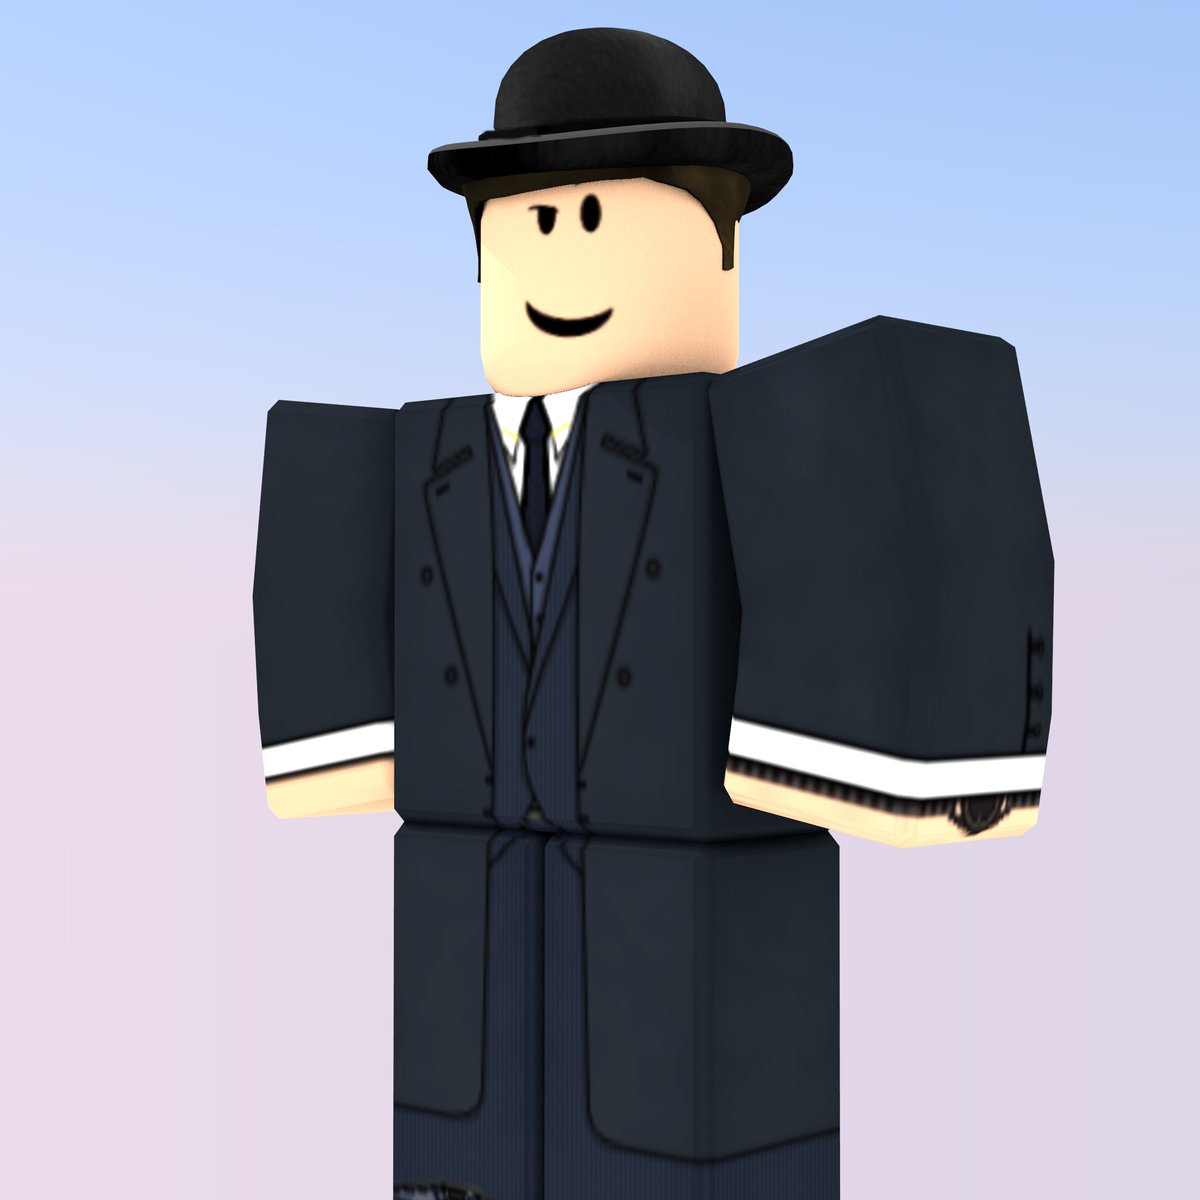 Exxtremestuffs At Exxtremestuffs Twitter - roblox racing suit